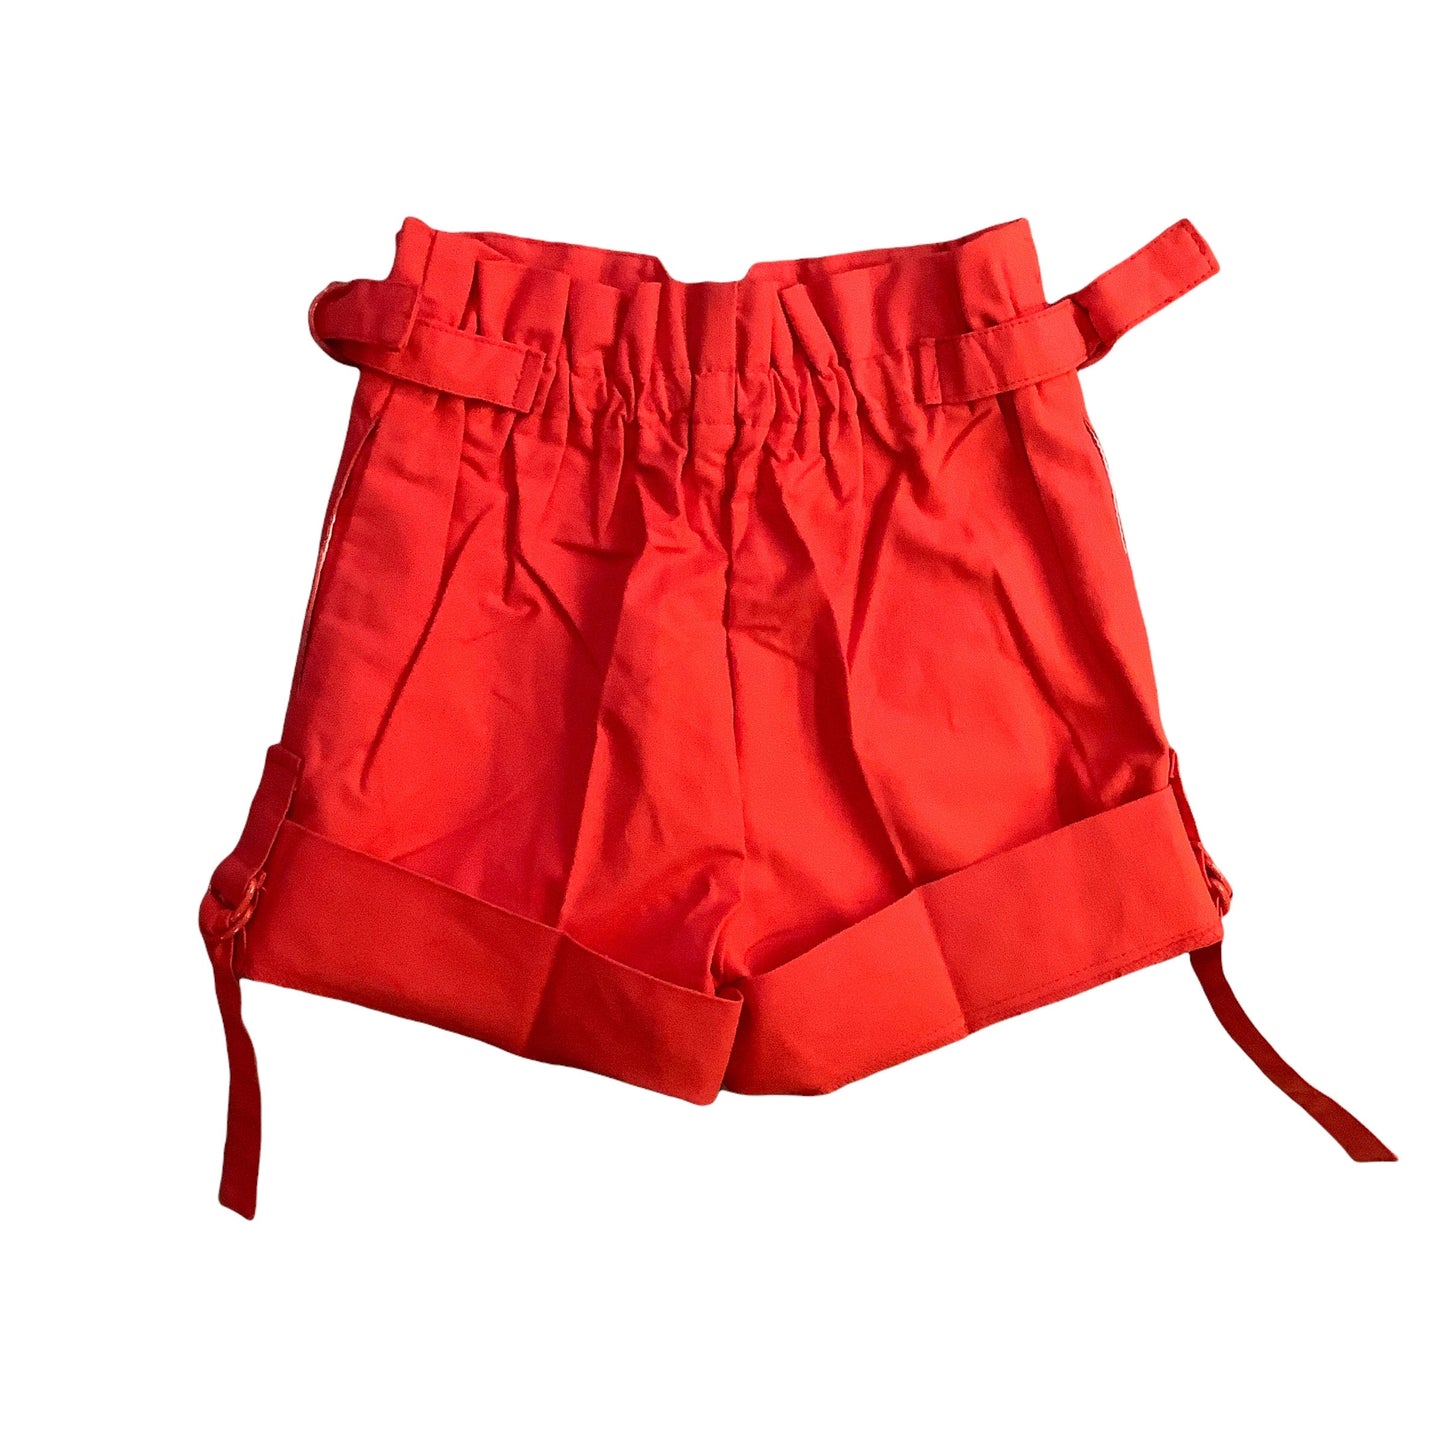 Vintage 1970's Red Shorts 6-8Y